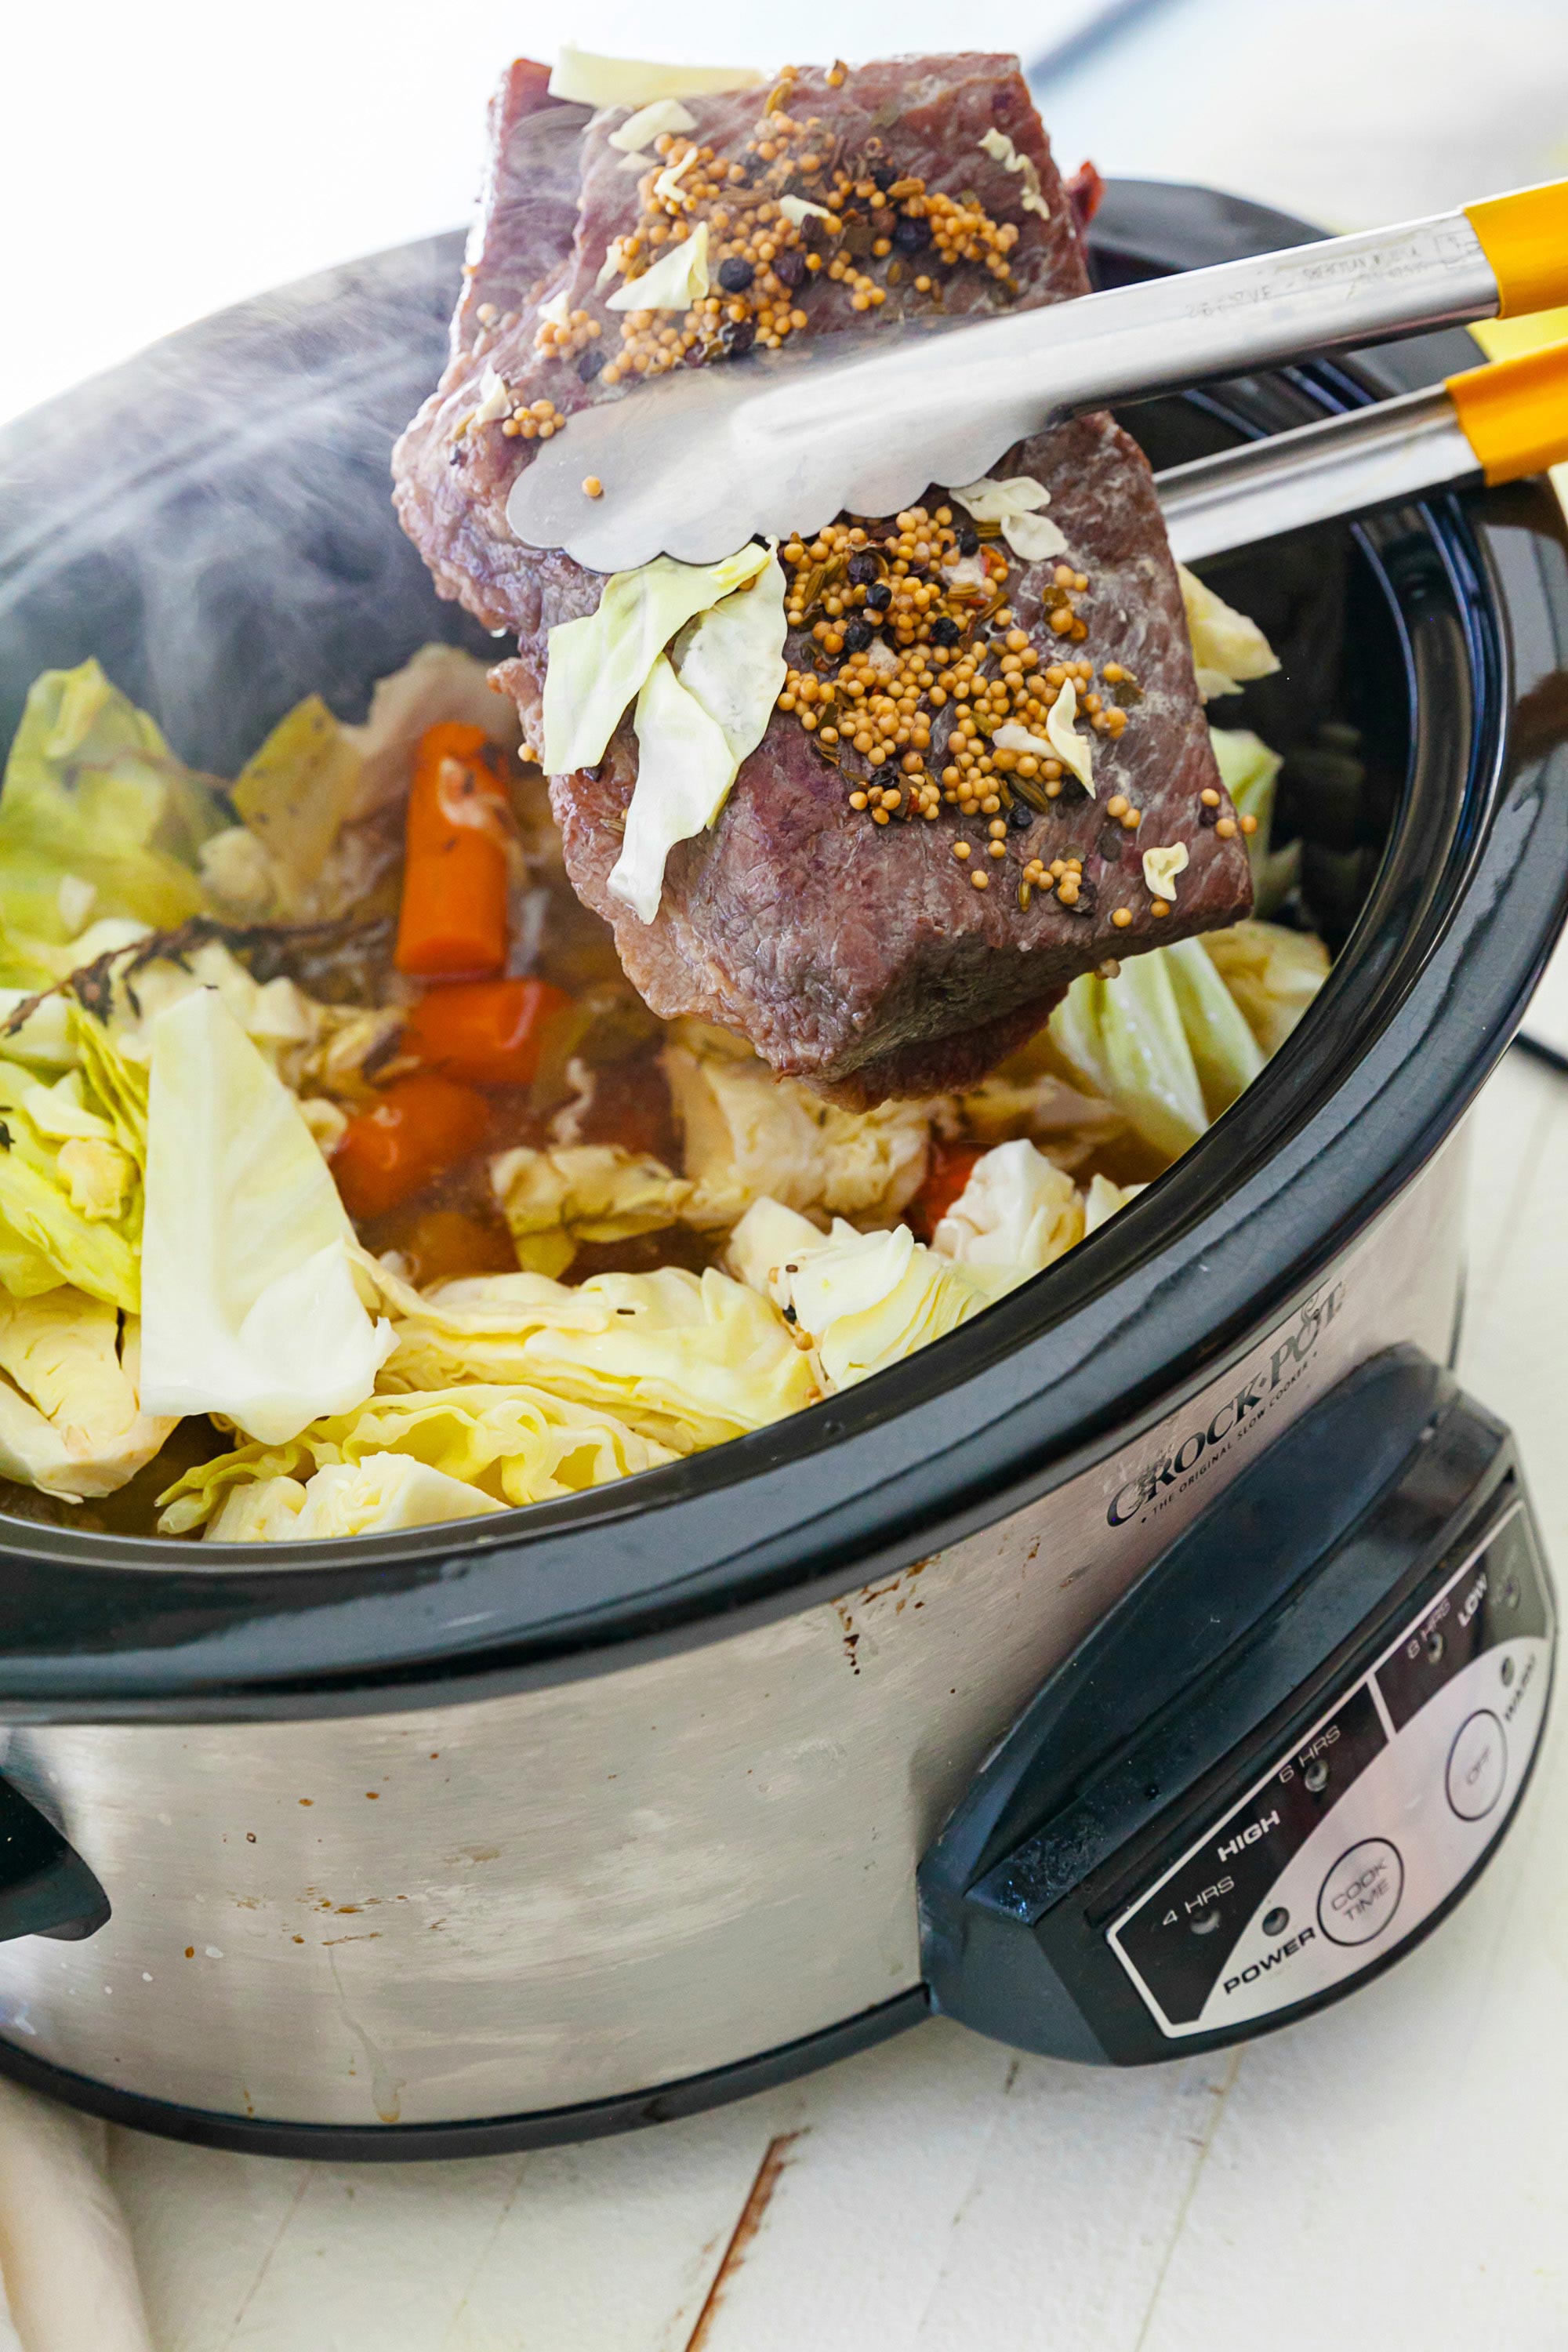 Tongs pulling Corned Beef out of a Crock Pot.